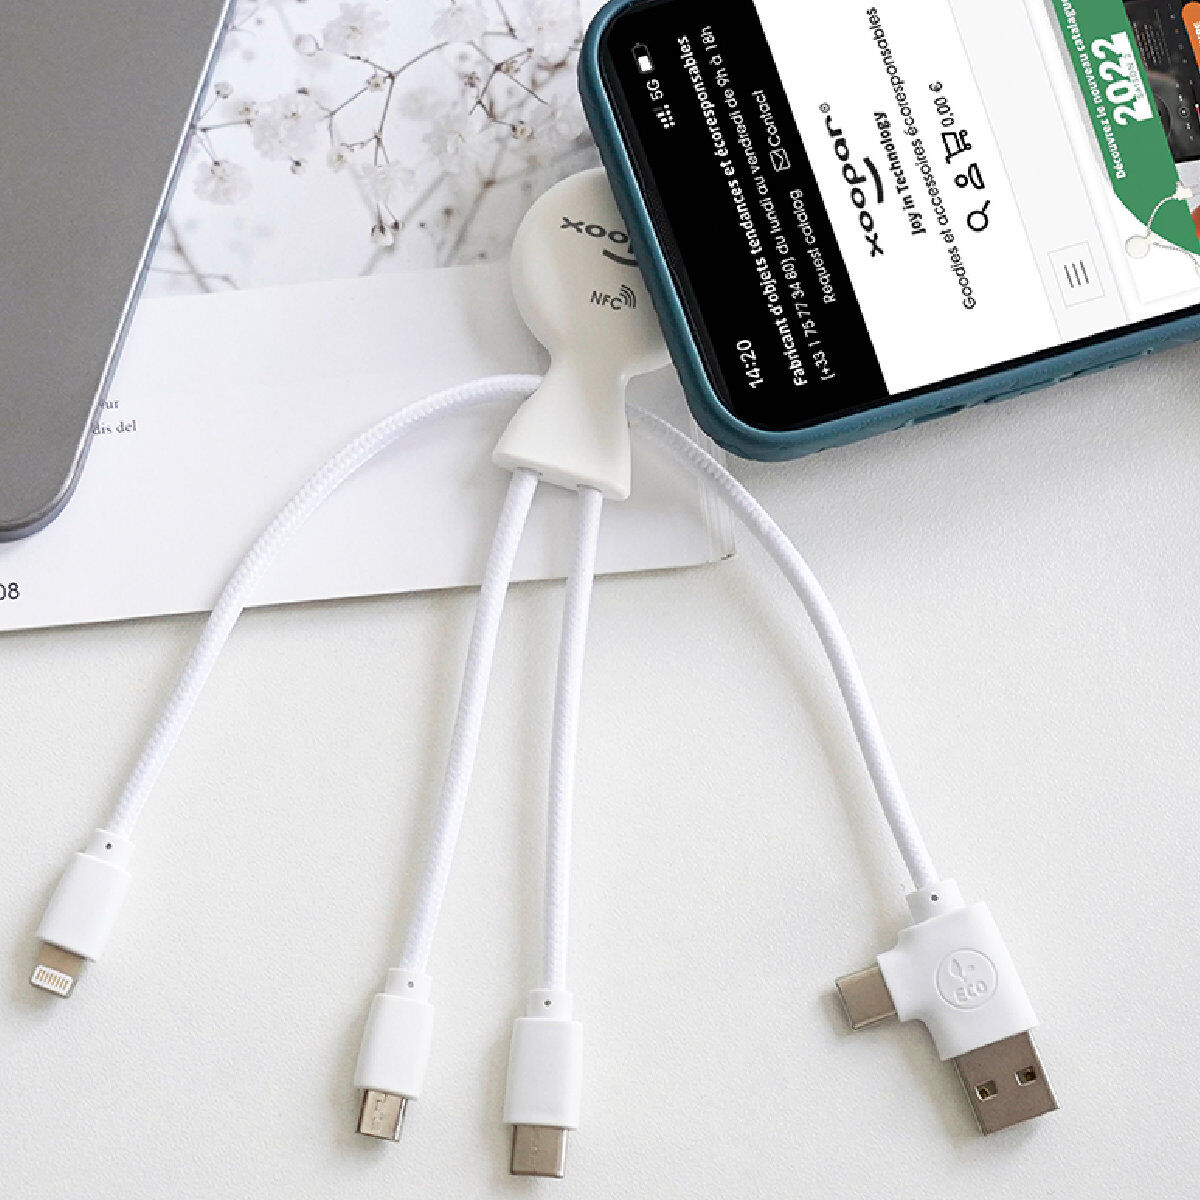 Mr Bio Smart NFC Charge Cable